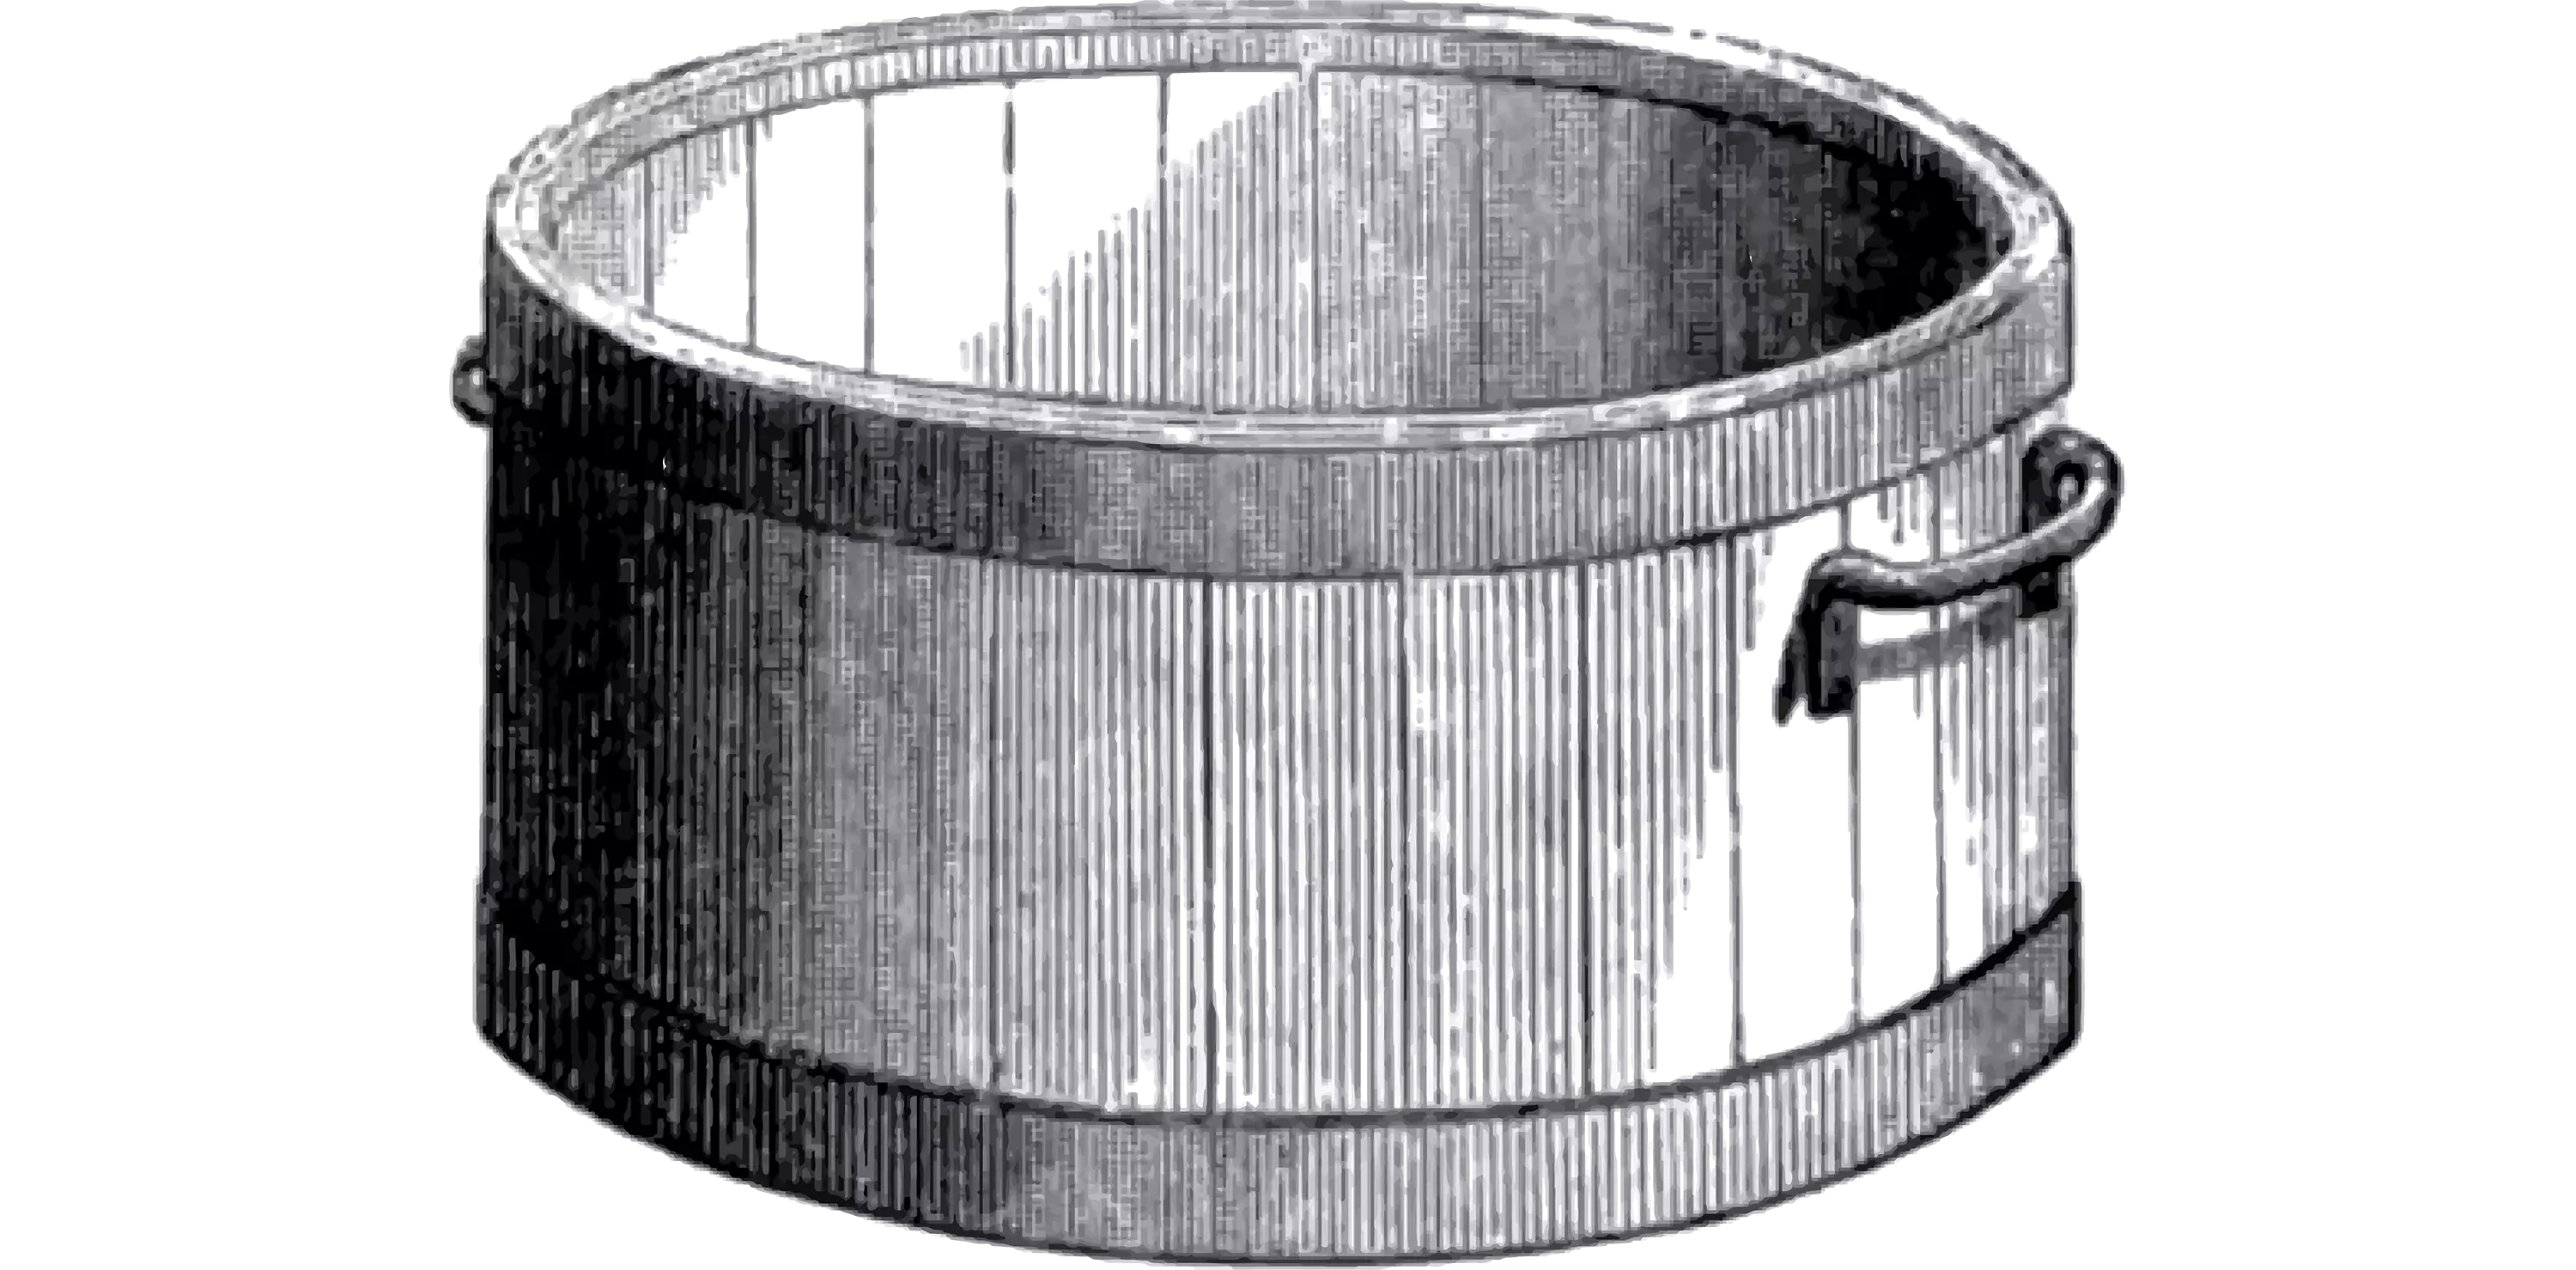 The Imperial Bushel. Source: The Book of Farm Implements and Machines, Slight & Burn, 1858, p496.